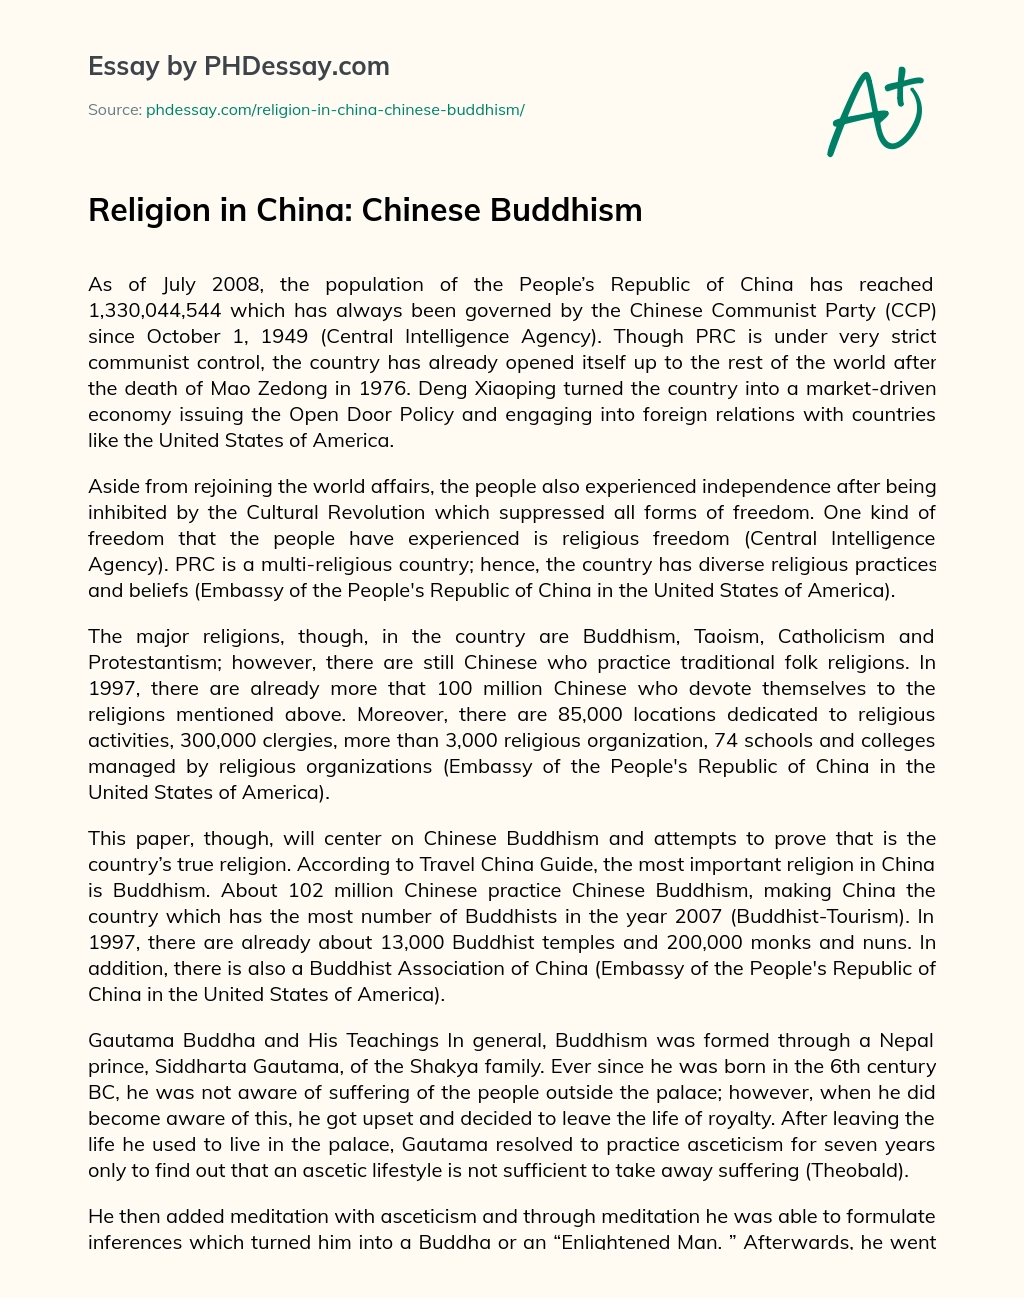 Religion in China: Chinese Buddhism essay